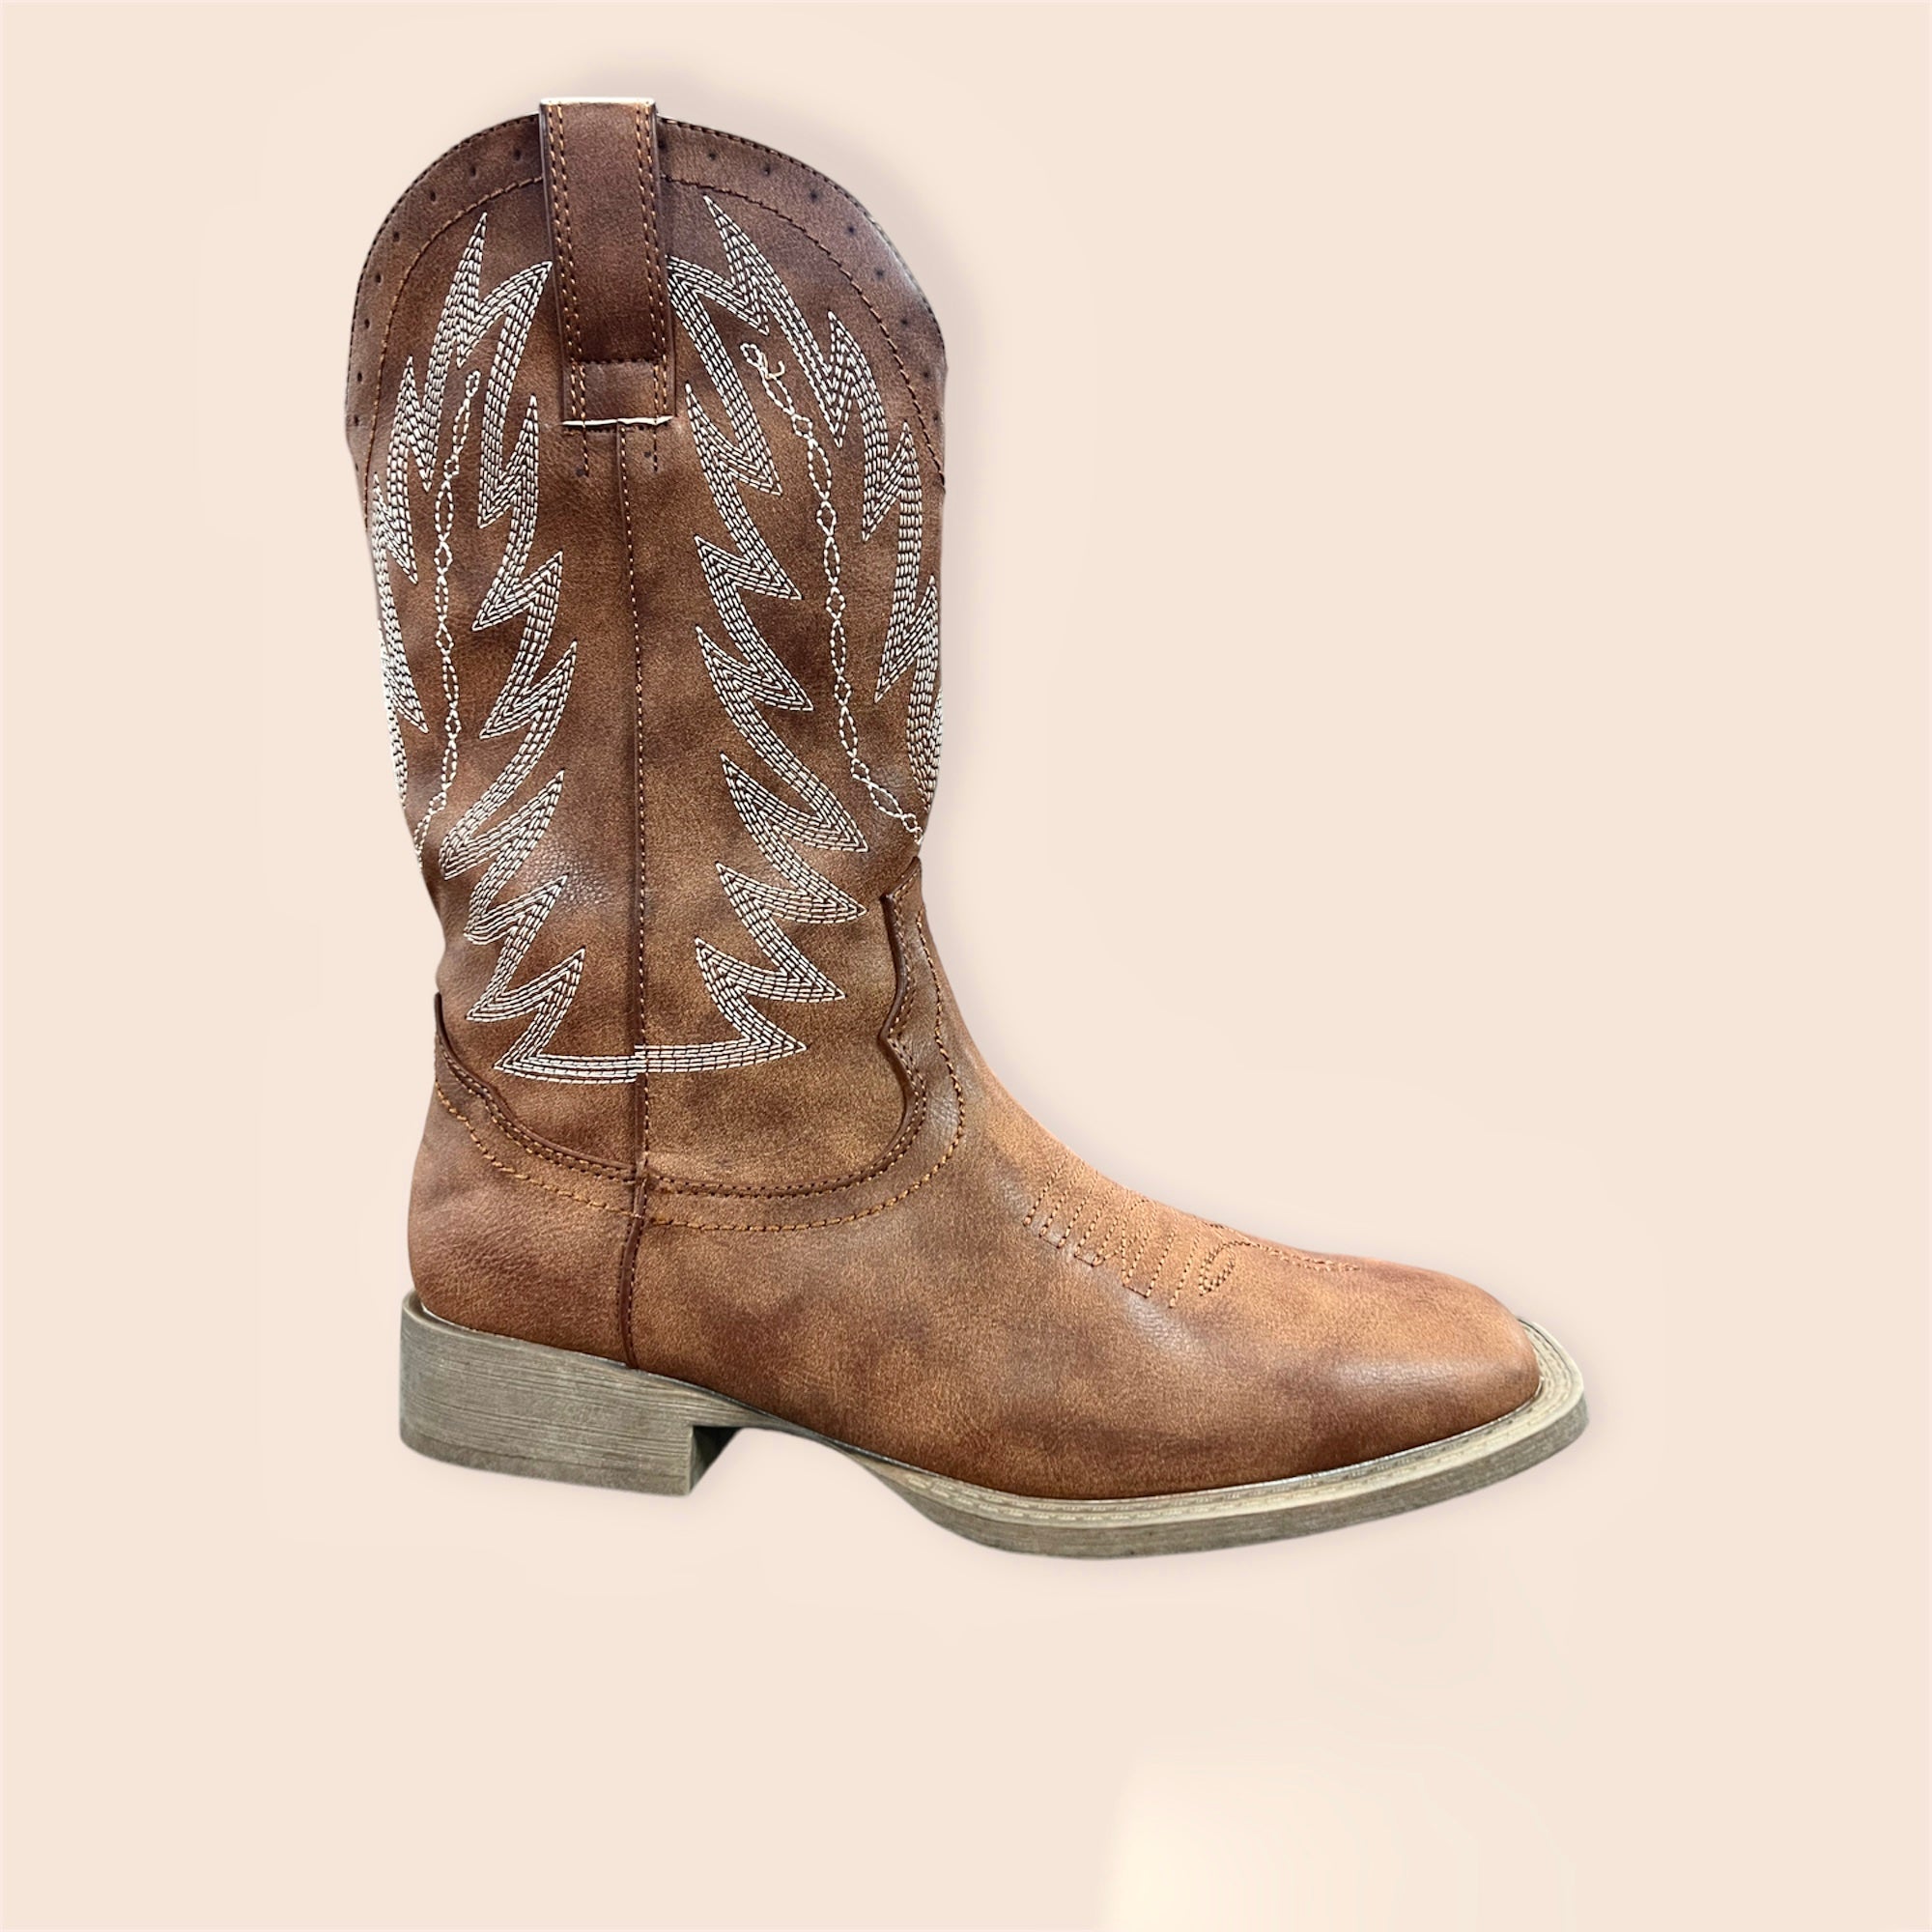 Wyoming Boots